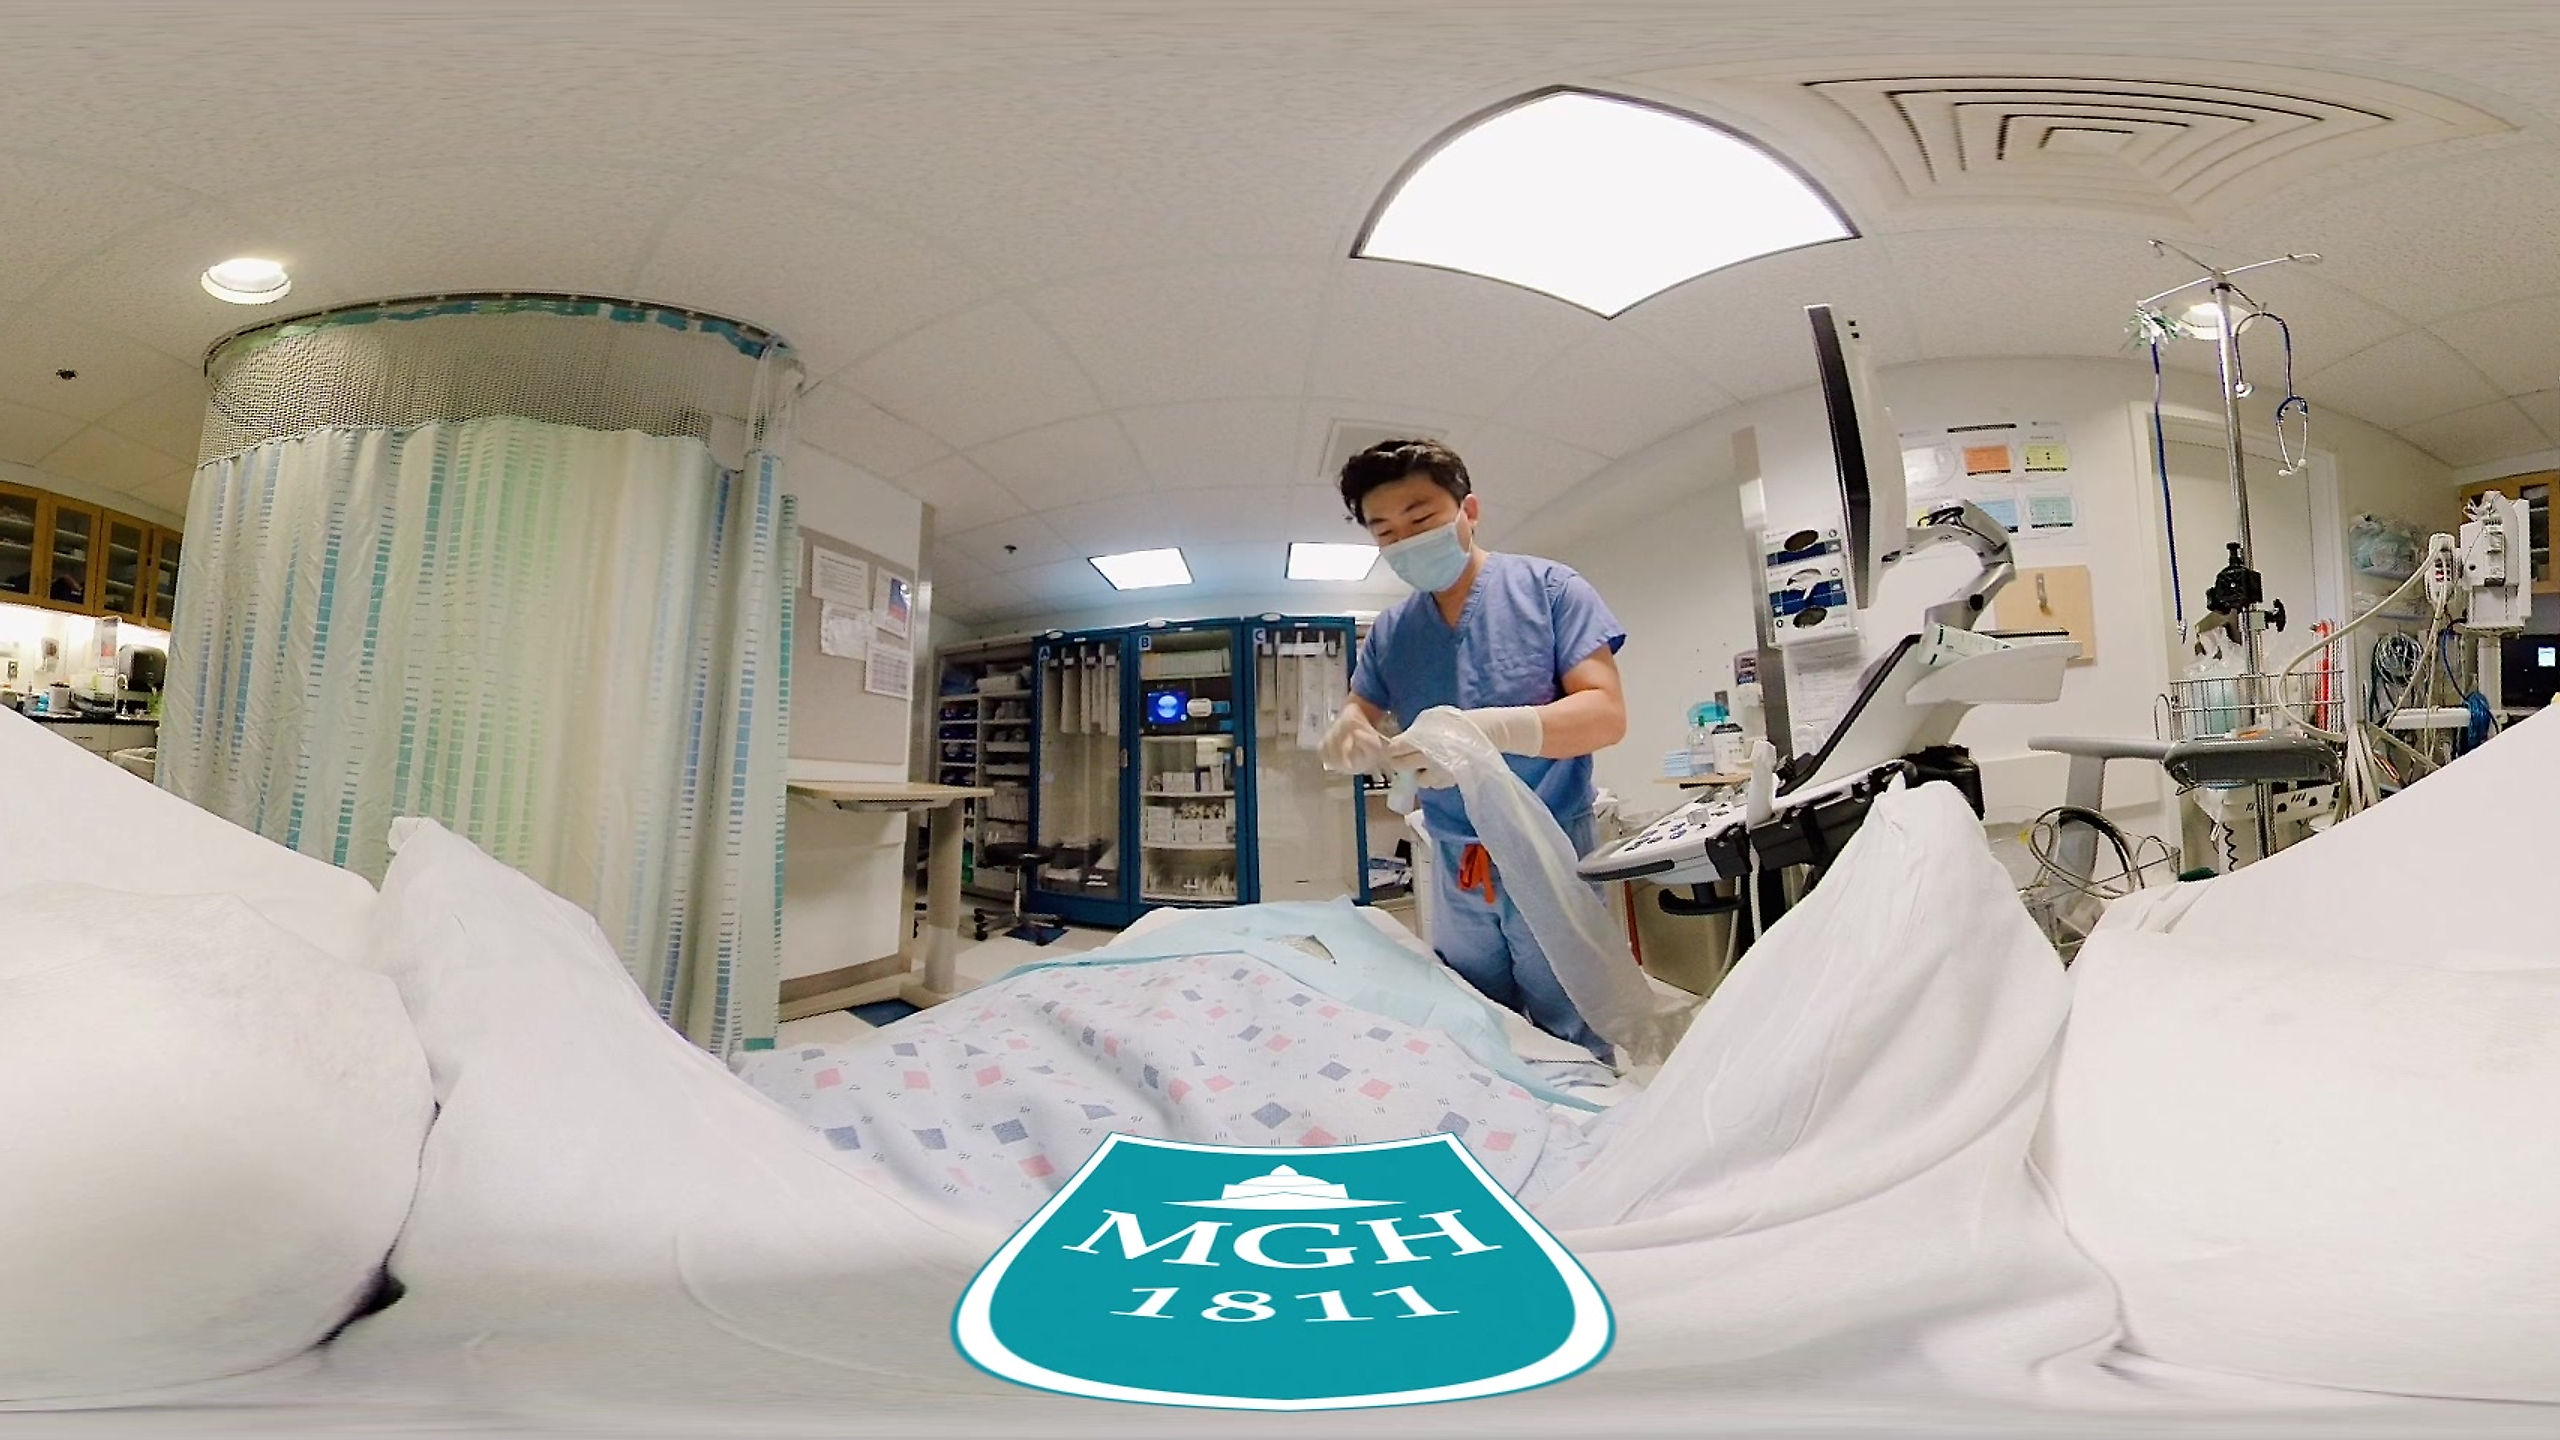 Immersive videos focusing on the patients' medical experience